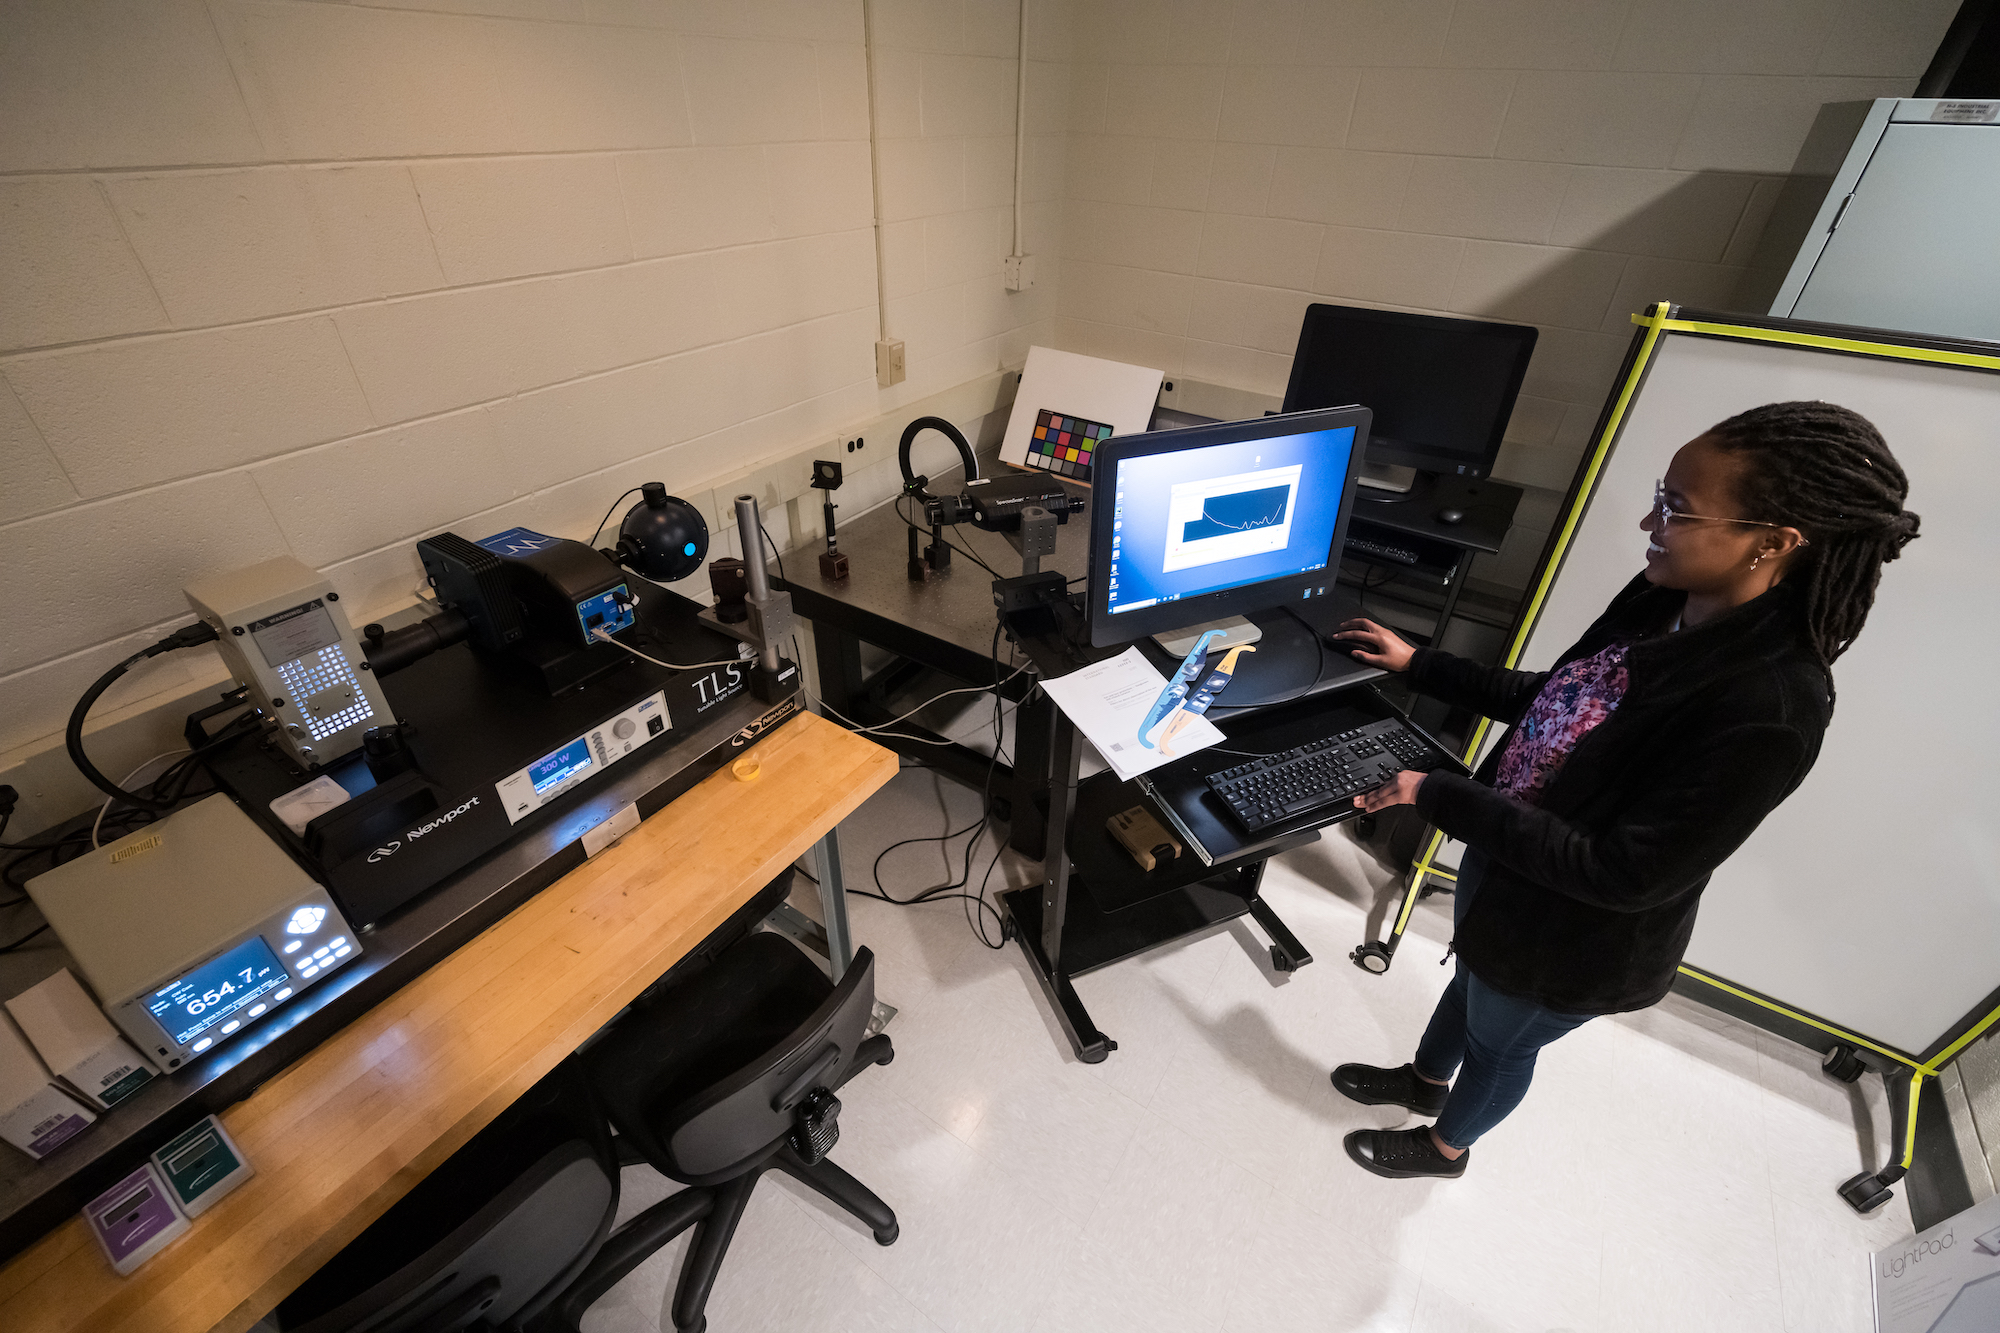 PhD student stands at computer station running a test on a pair of eclipse glasses